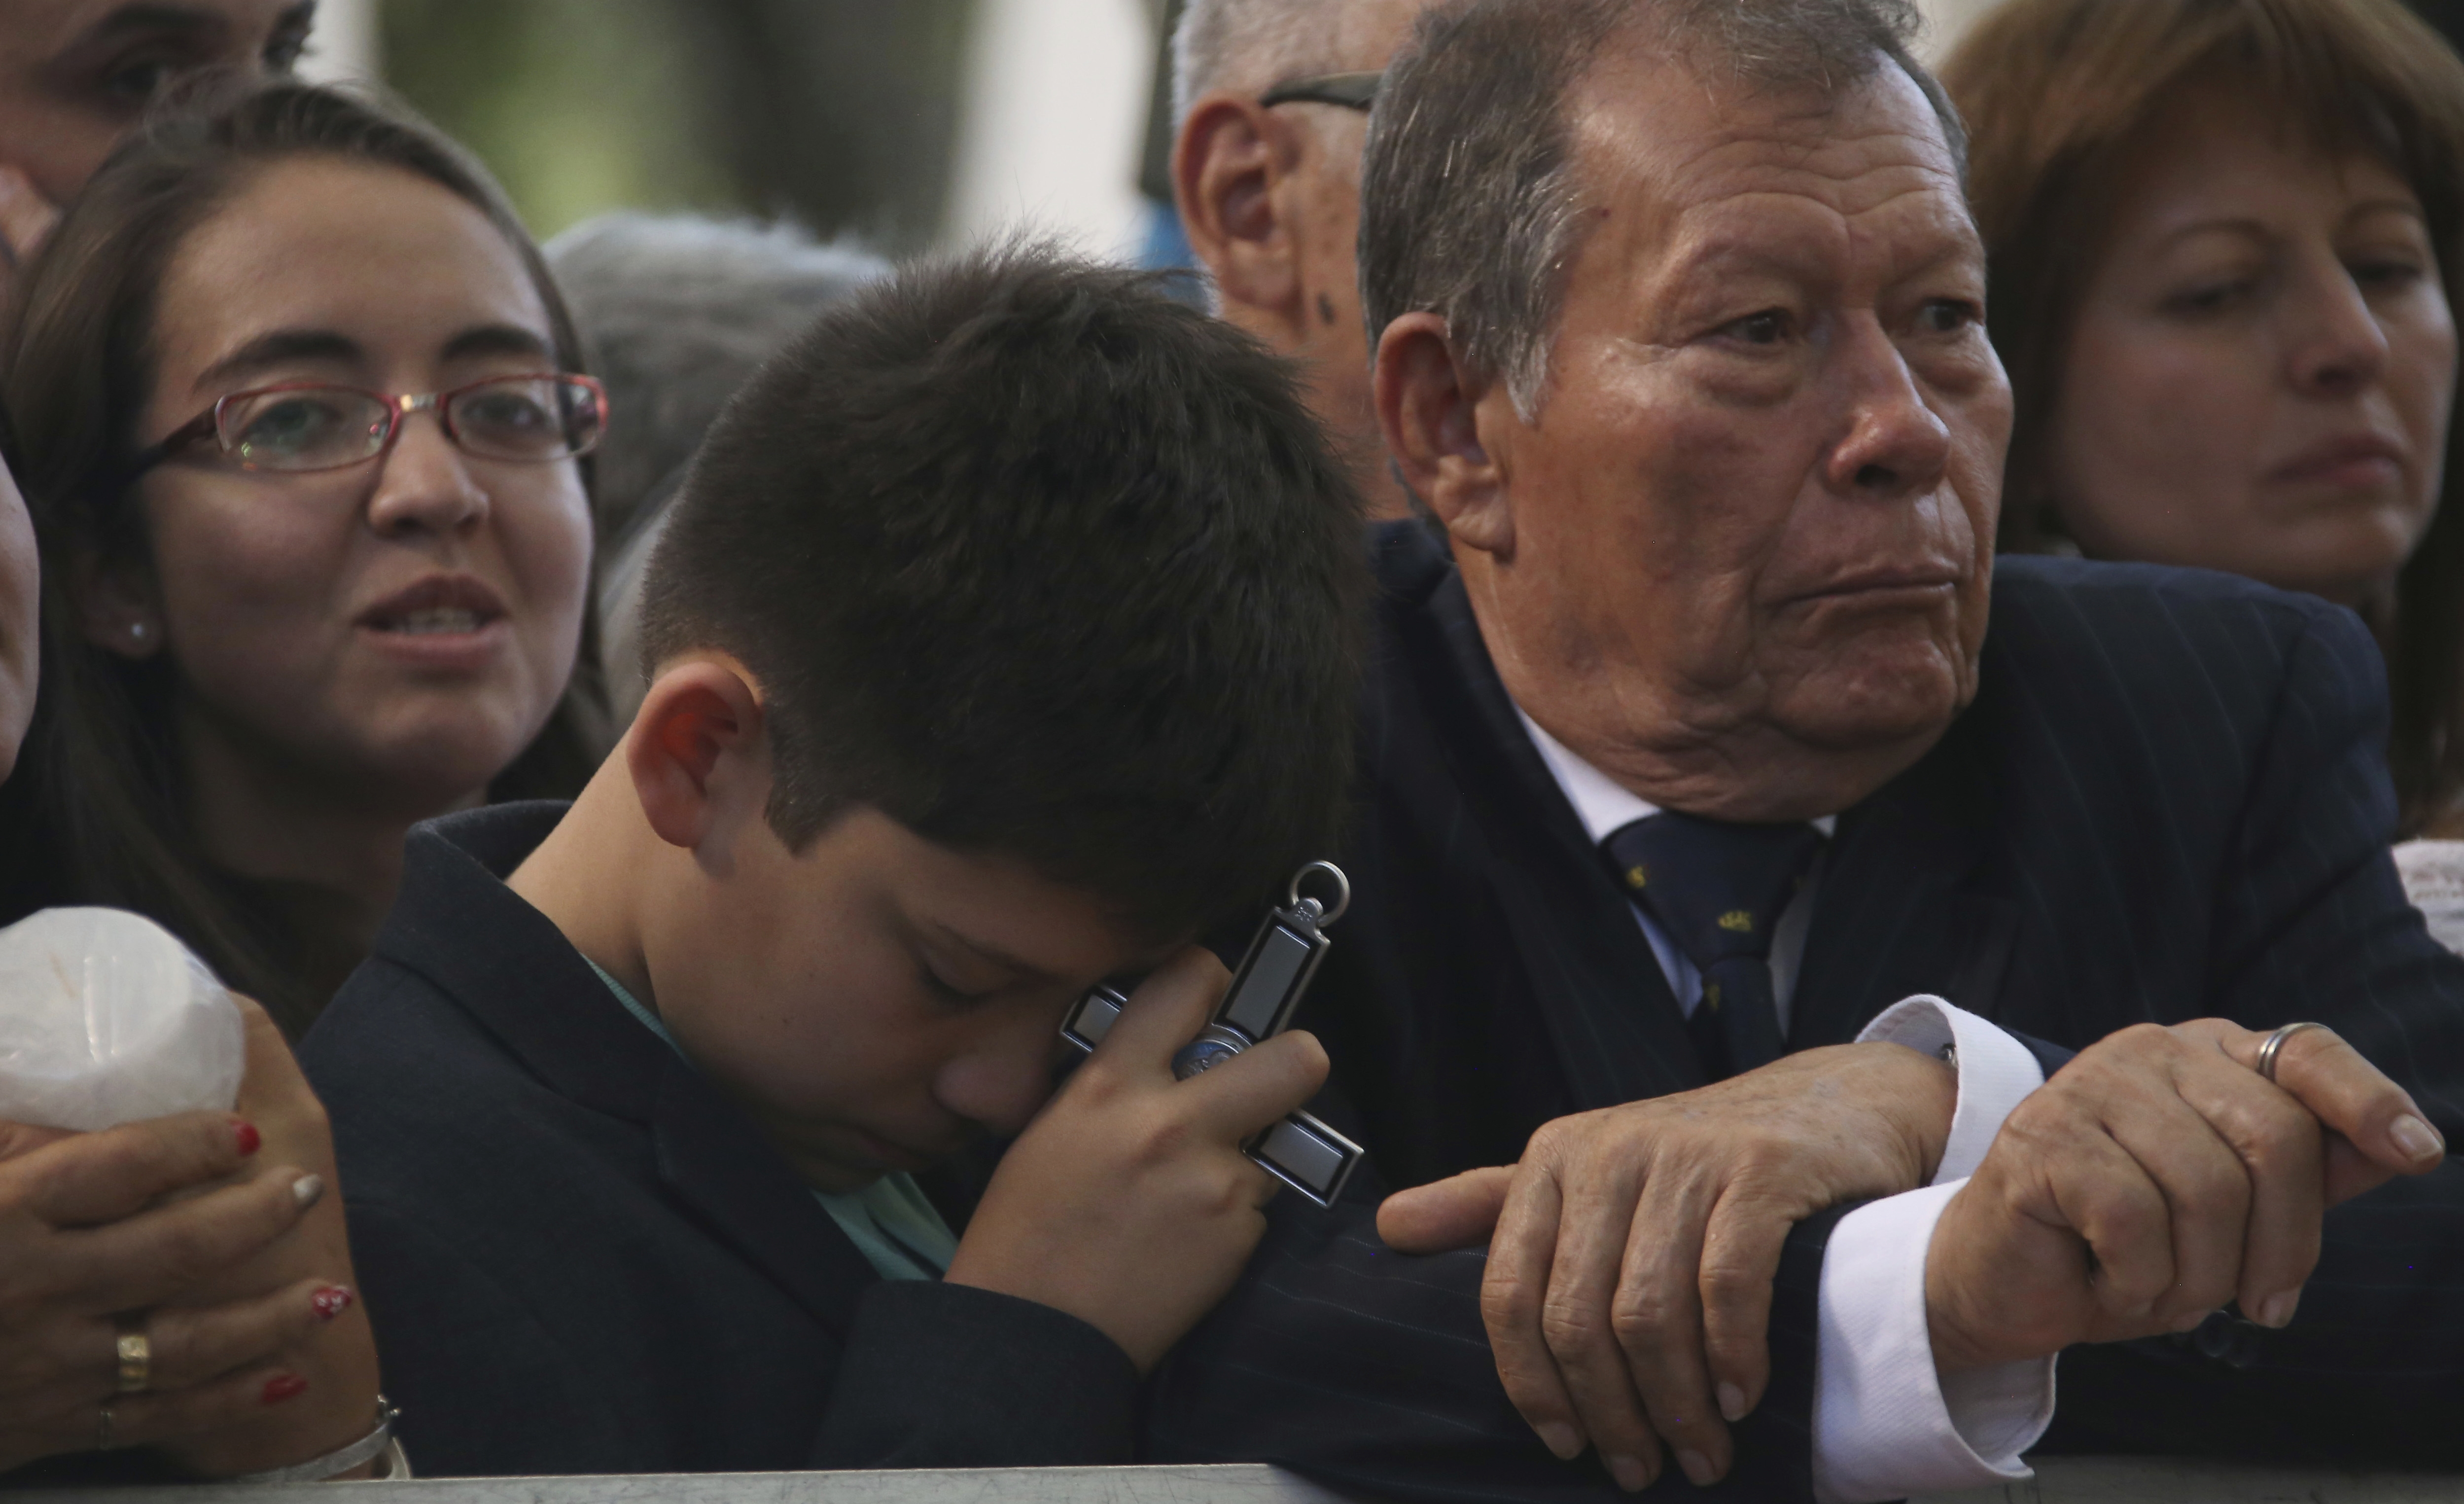 A boy prays holding a crucifix as he and others wait for Pope Francis at the nunciature in Bogota, Colombia, Wednesday, Sept. 6, 2017. (AP Photo/Ivan Valencia)